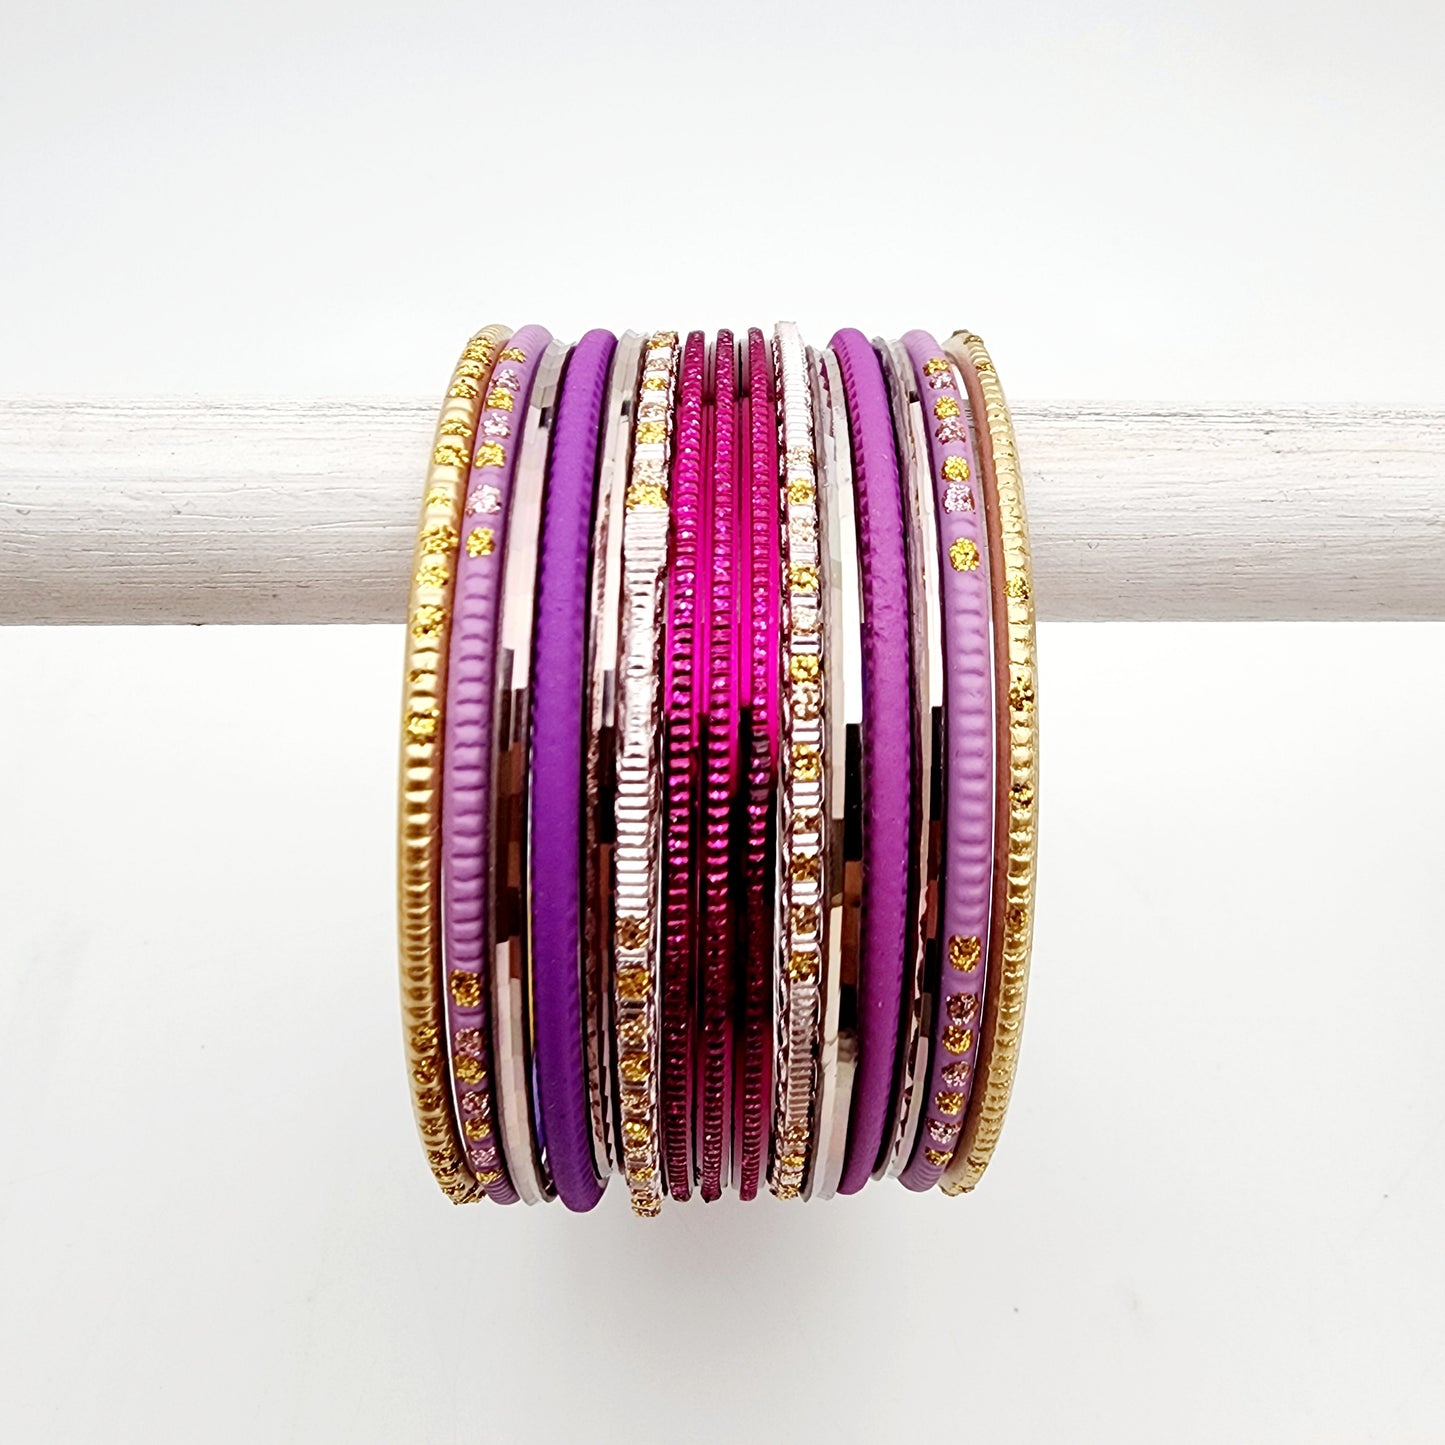 Manni Bangle Set Indian Bangles , South Asian Bangles , Pakistani Bangles , Desi Bangles , Punjabi Bangles , Tamil Bangles , Indian Jewelry